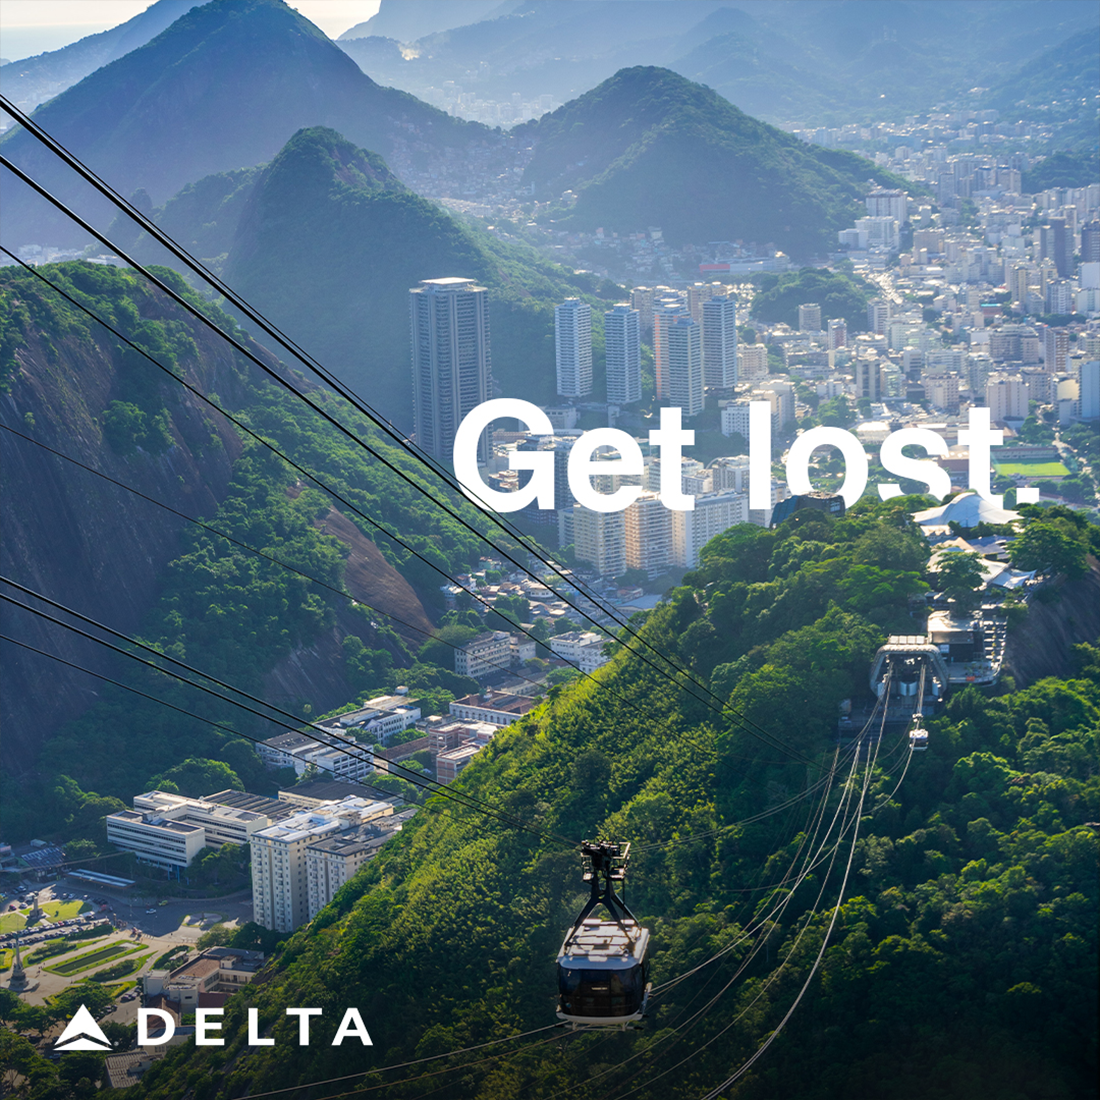 Advertising - Delta Airlines “Get Lost” Campaign - Image 4